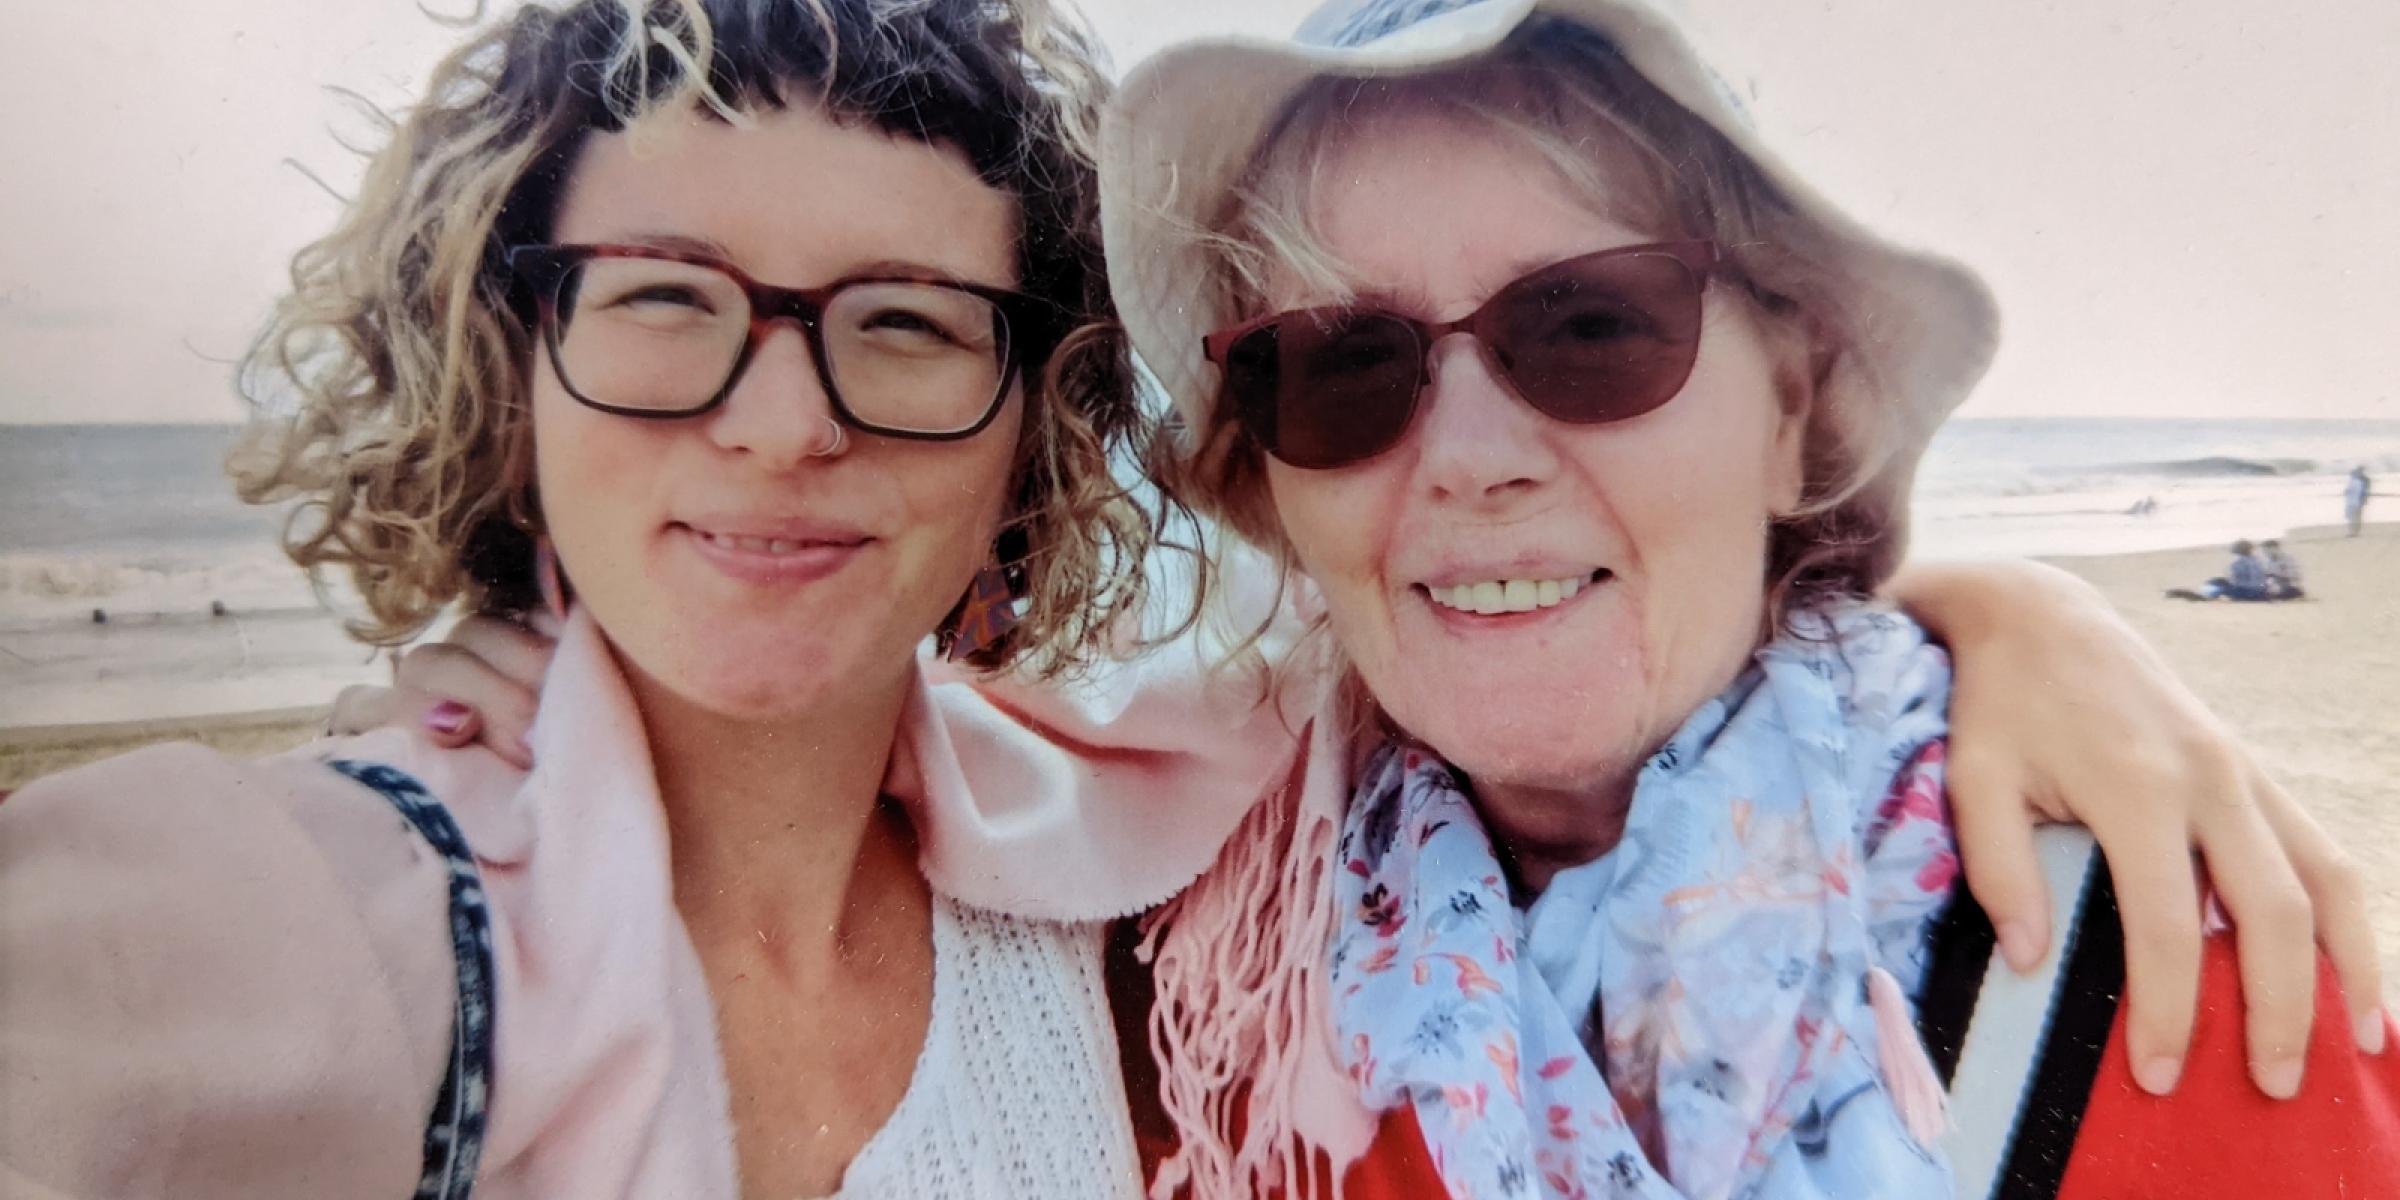 Cara has her arm around her mum while standing on a sandy beach and smiling together